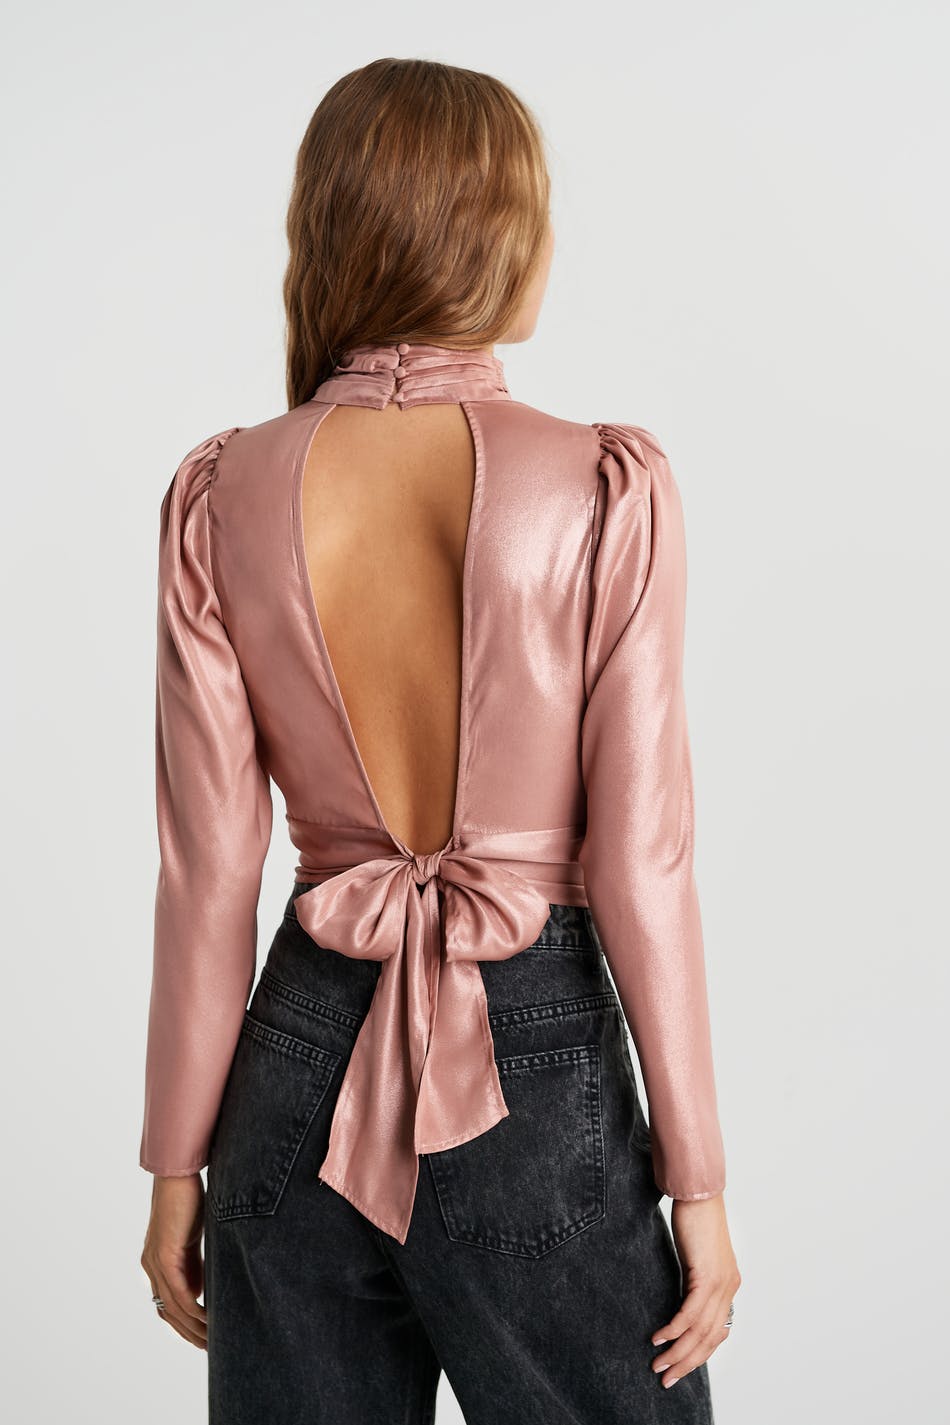 Liv open back top, Gina Tricot